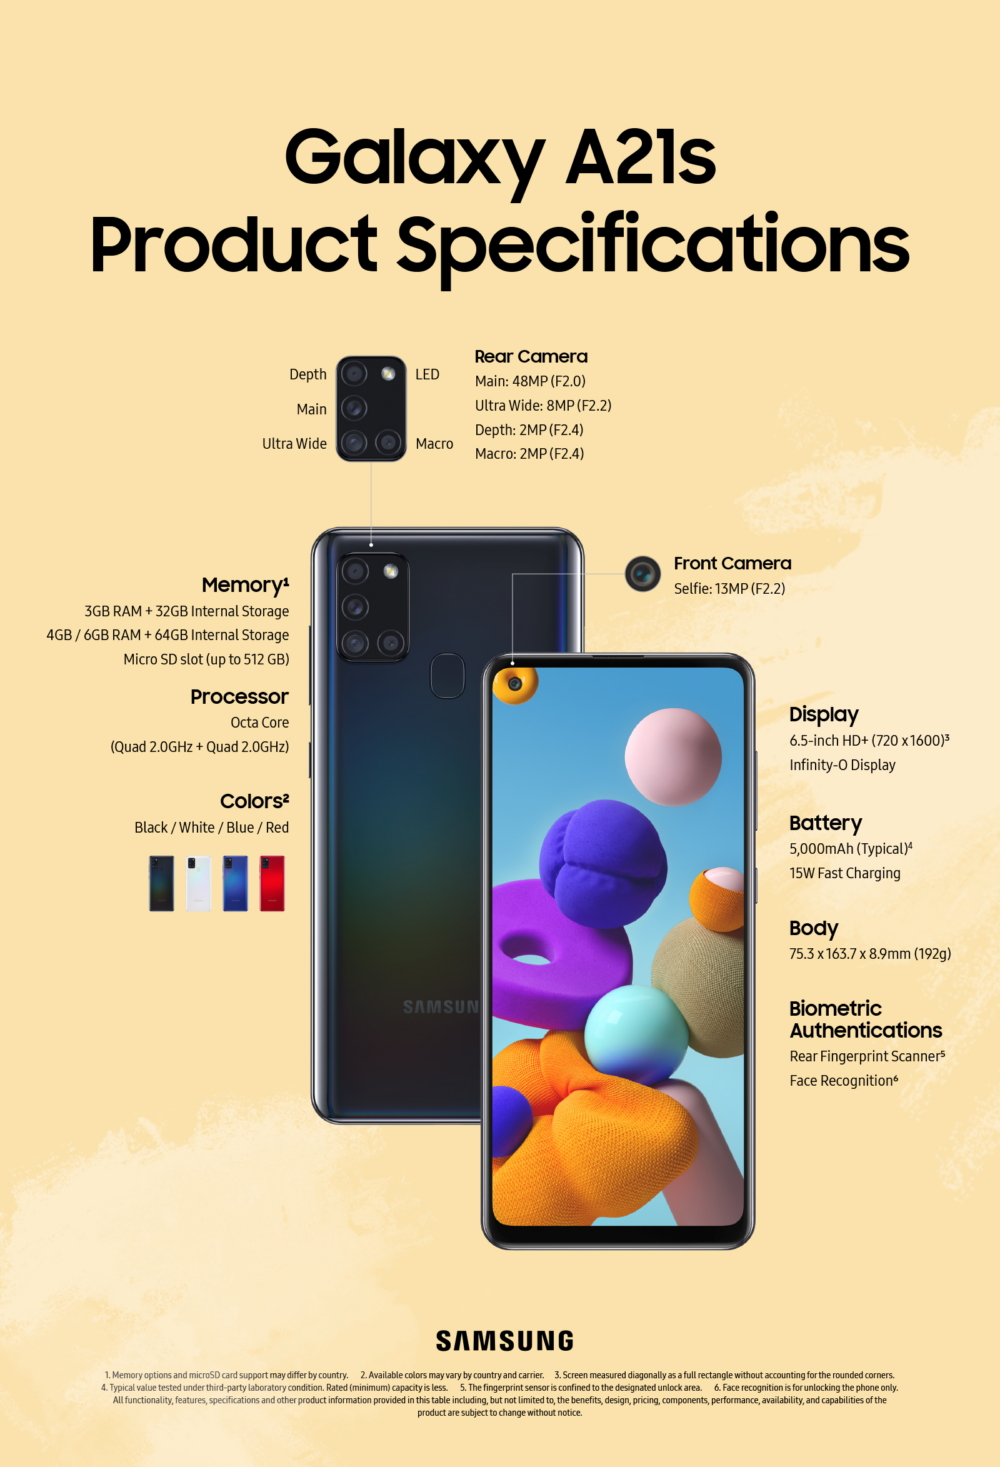 [Infographic] Galaxy A21s Delivers Enhanced Features in a Standout Design